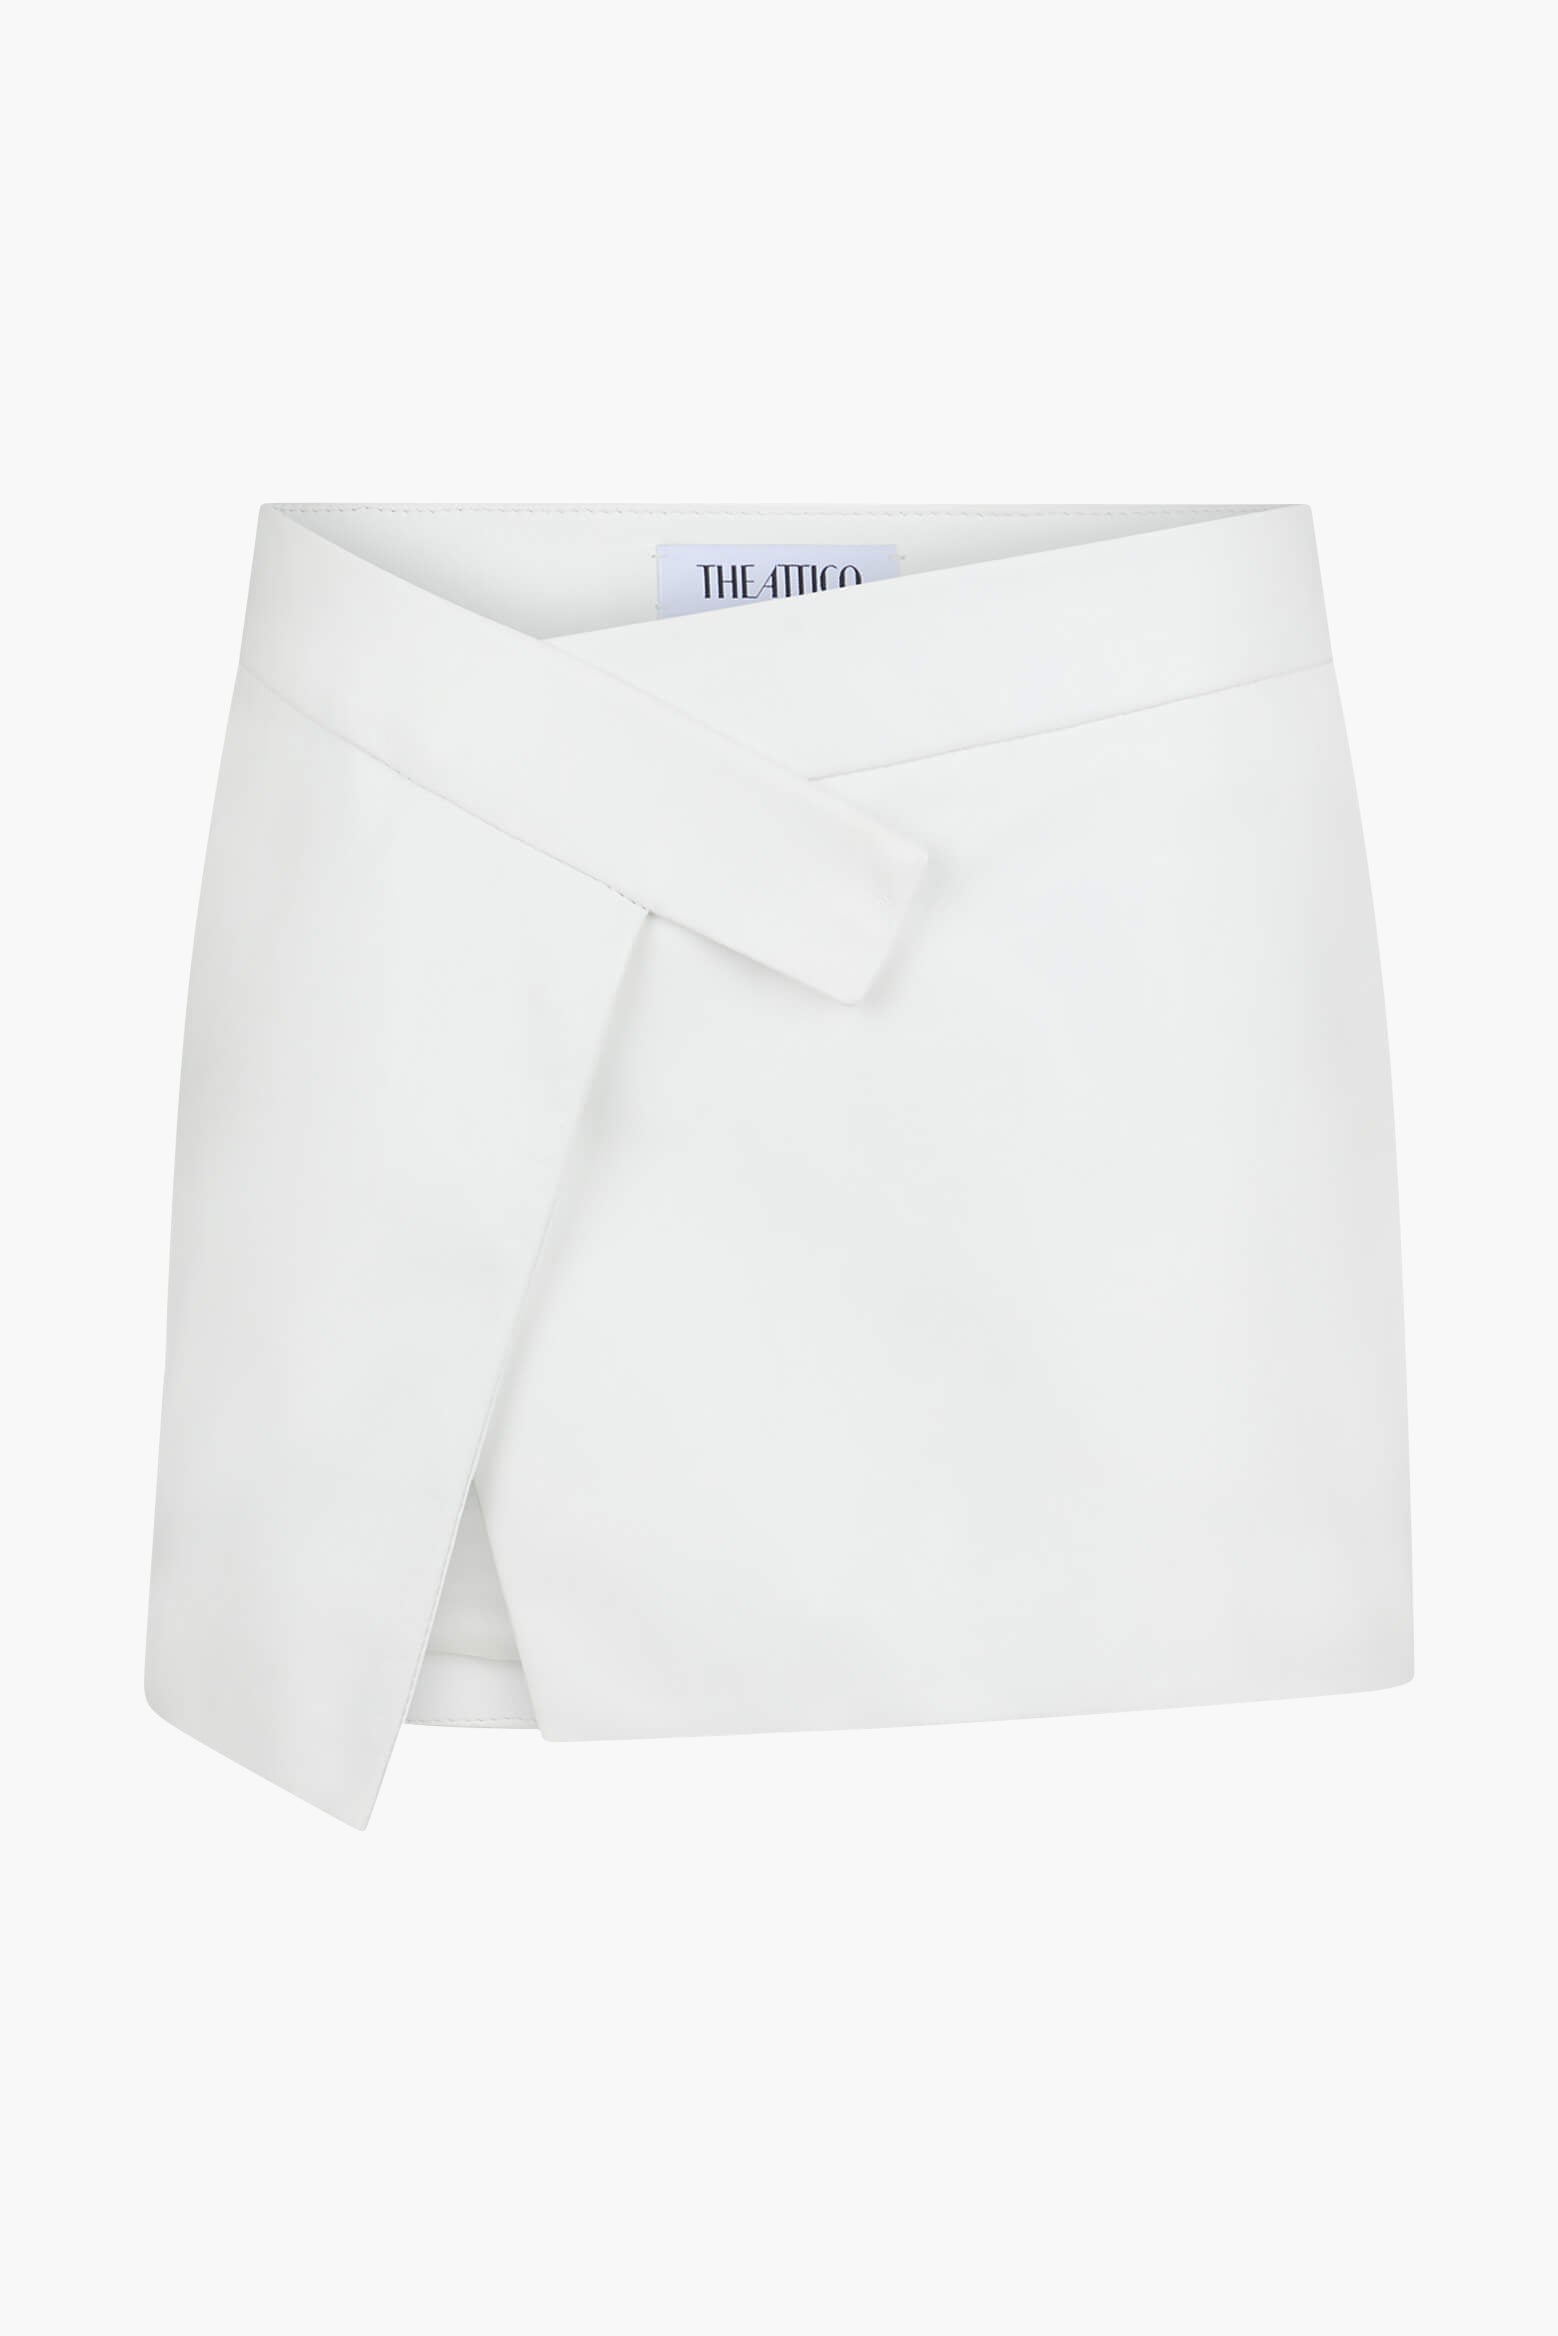 The Attico Cloe Mini Skirt in White Leather available at The New Trend